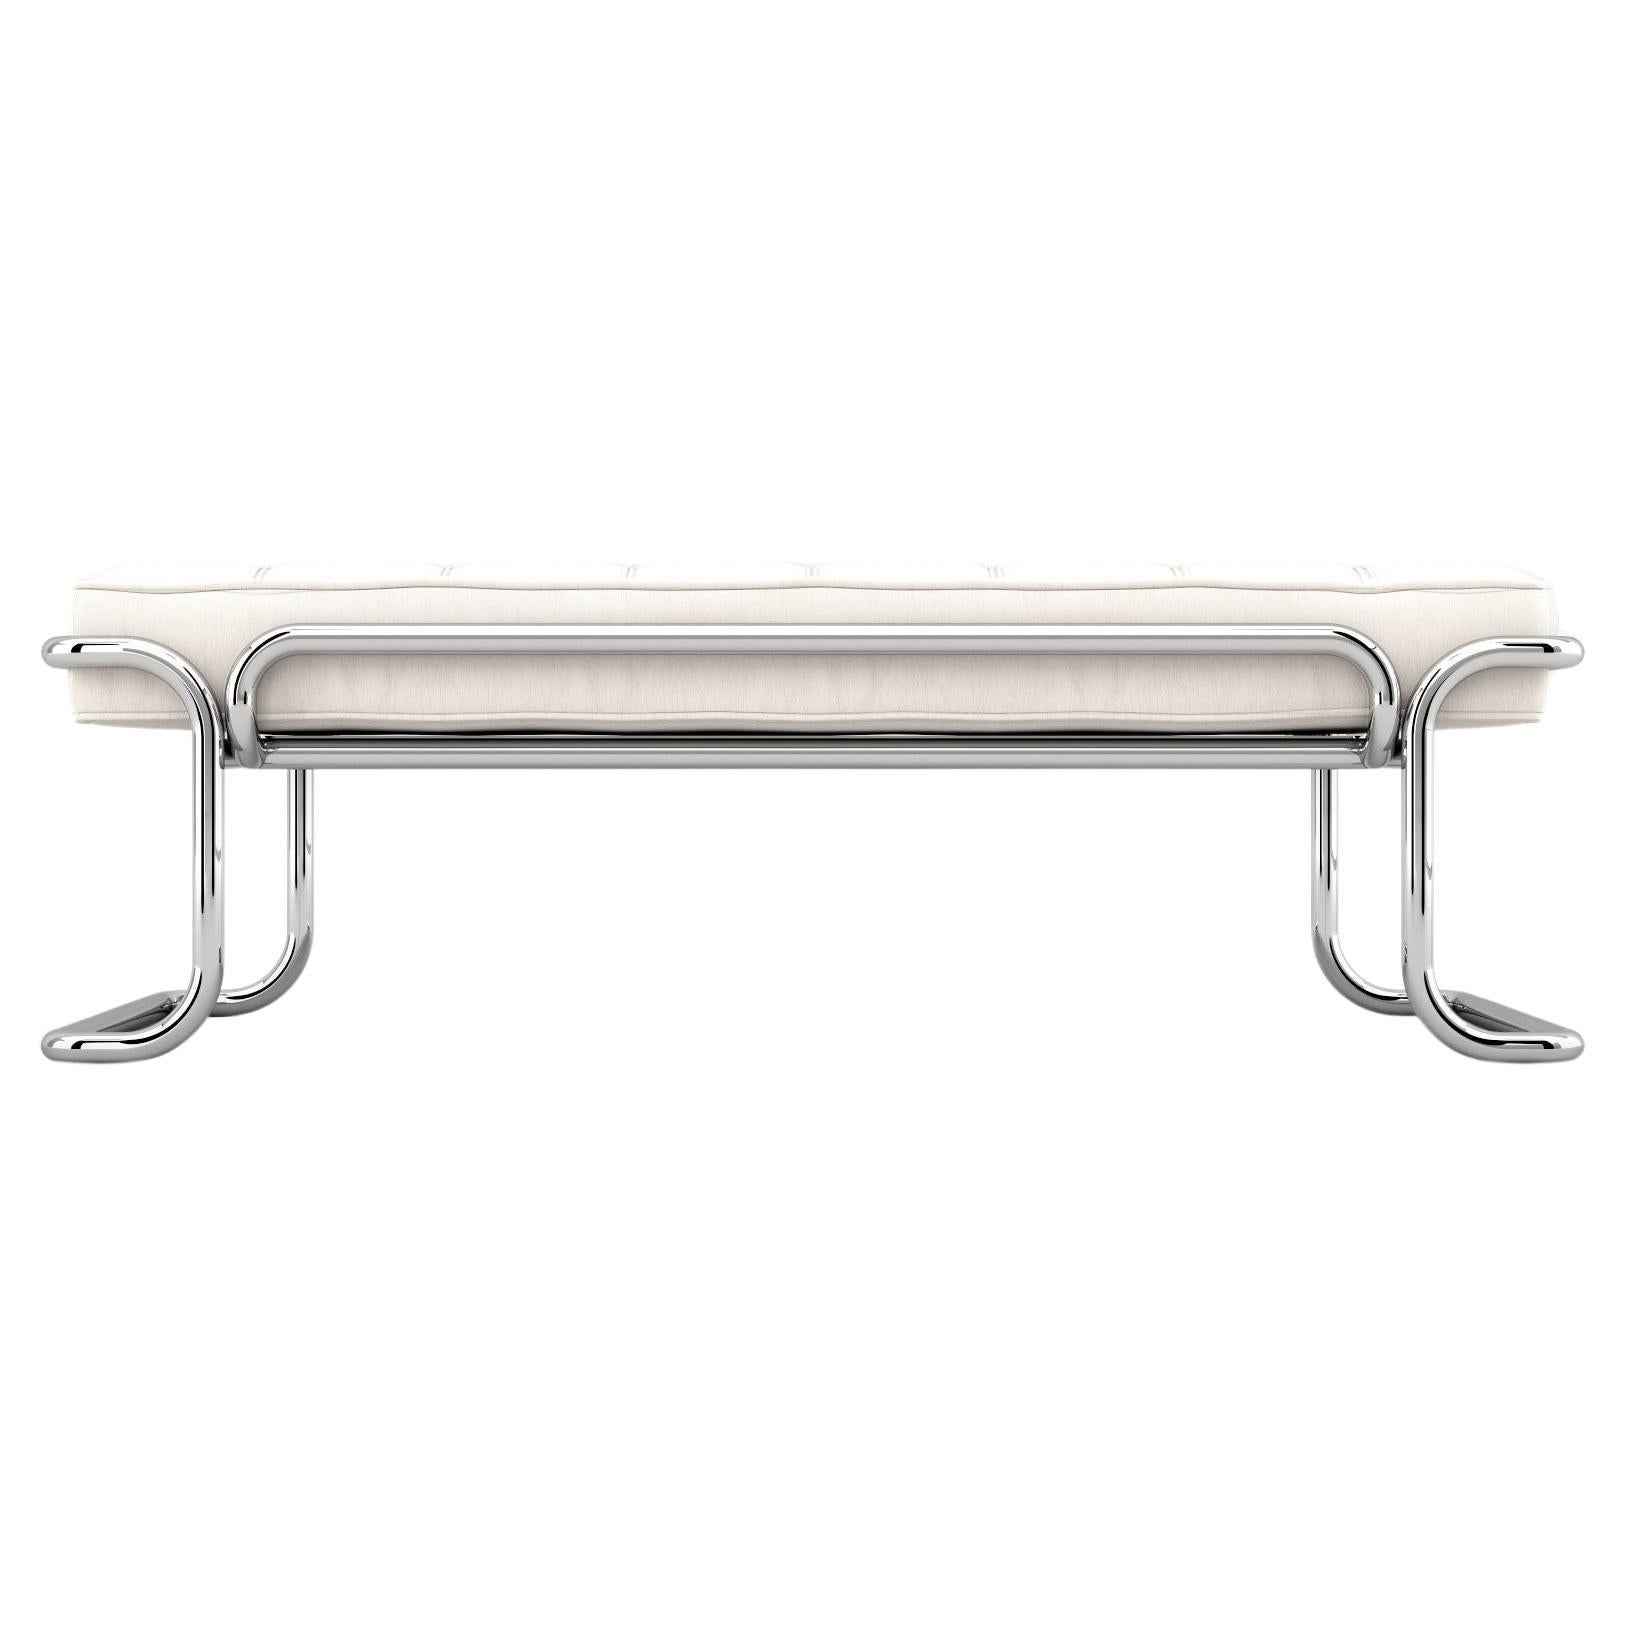 Lotus Banquette - Modern White Leather Sofa with Stainless Steel Legs